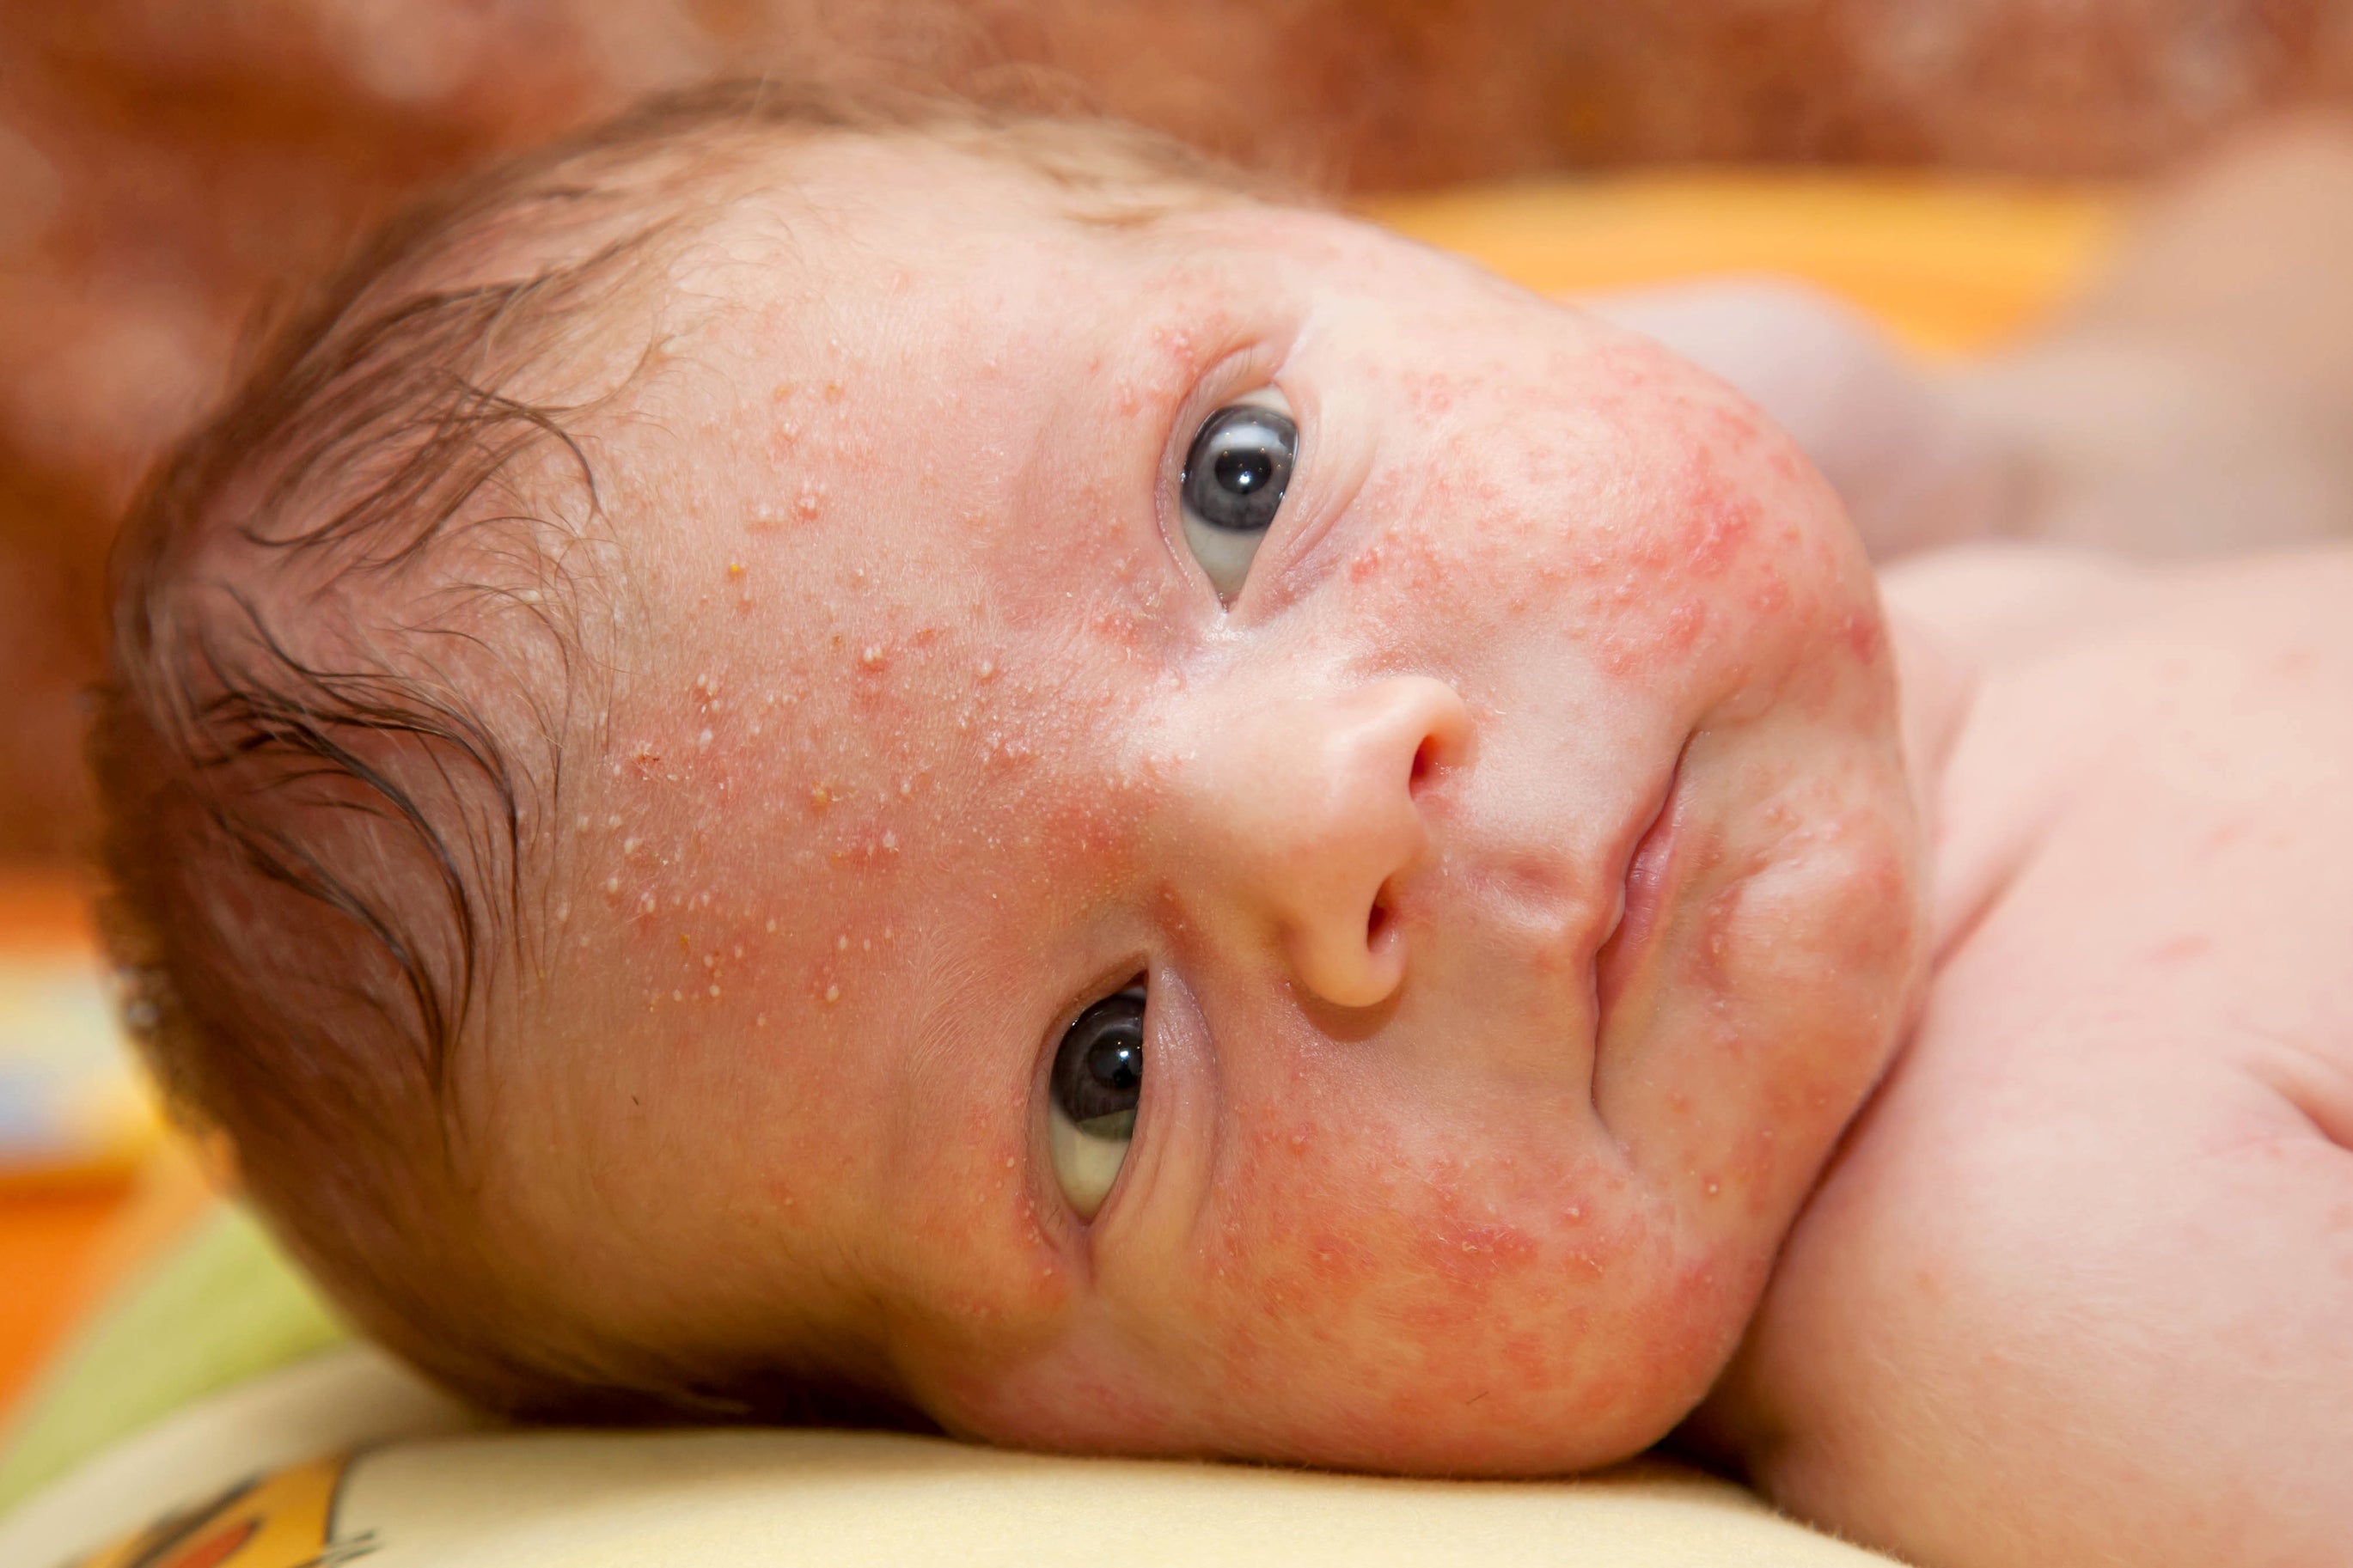 A newborn baby with neonatal acne on the face. Coconut oil can help with this common skin condition.